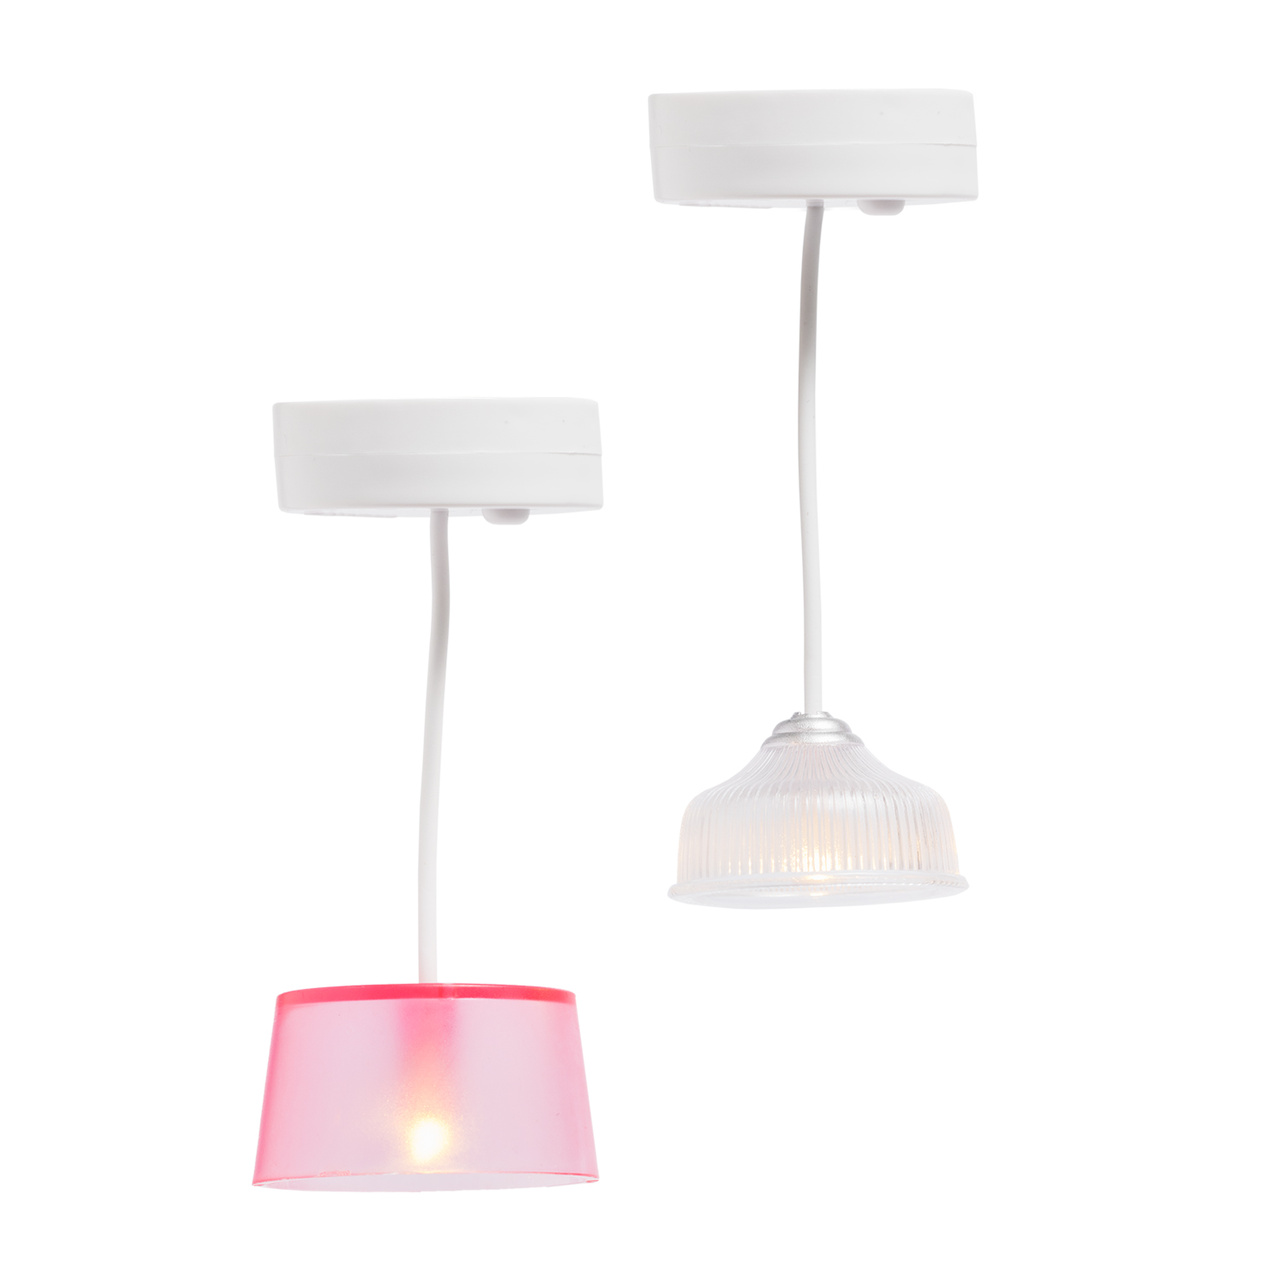 Doll house lighting lundby dollhouse lighting 2 ceiling lamps